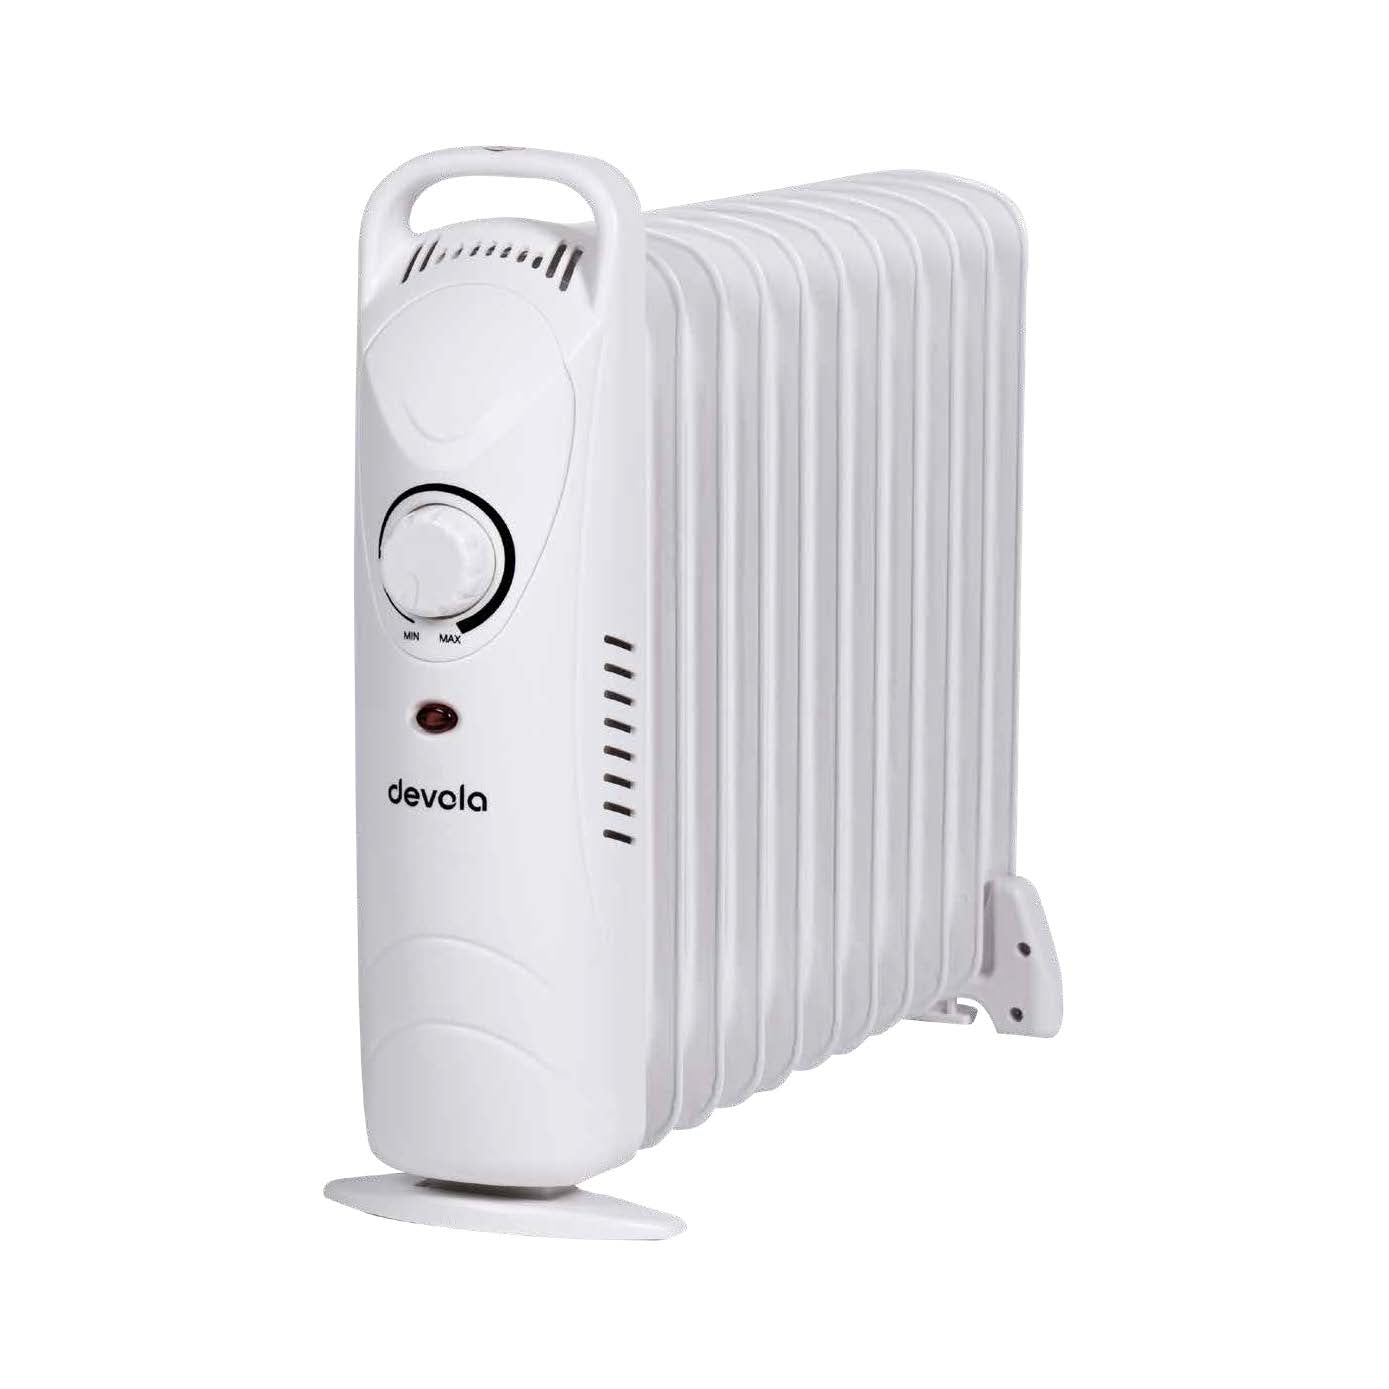 Image of a Devola 1000W Mini Oil-Filled Radiator (11 Fin) on a white background